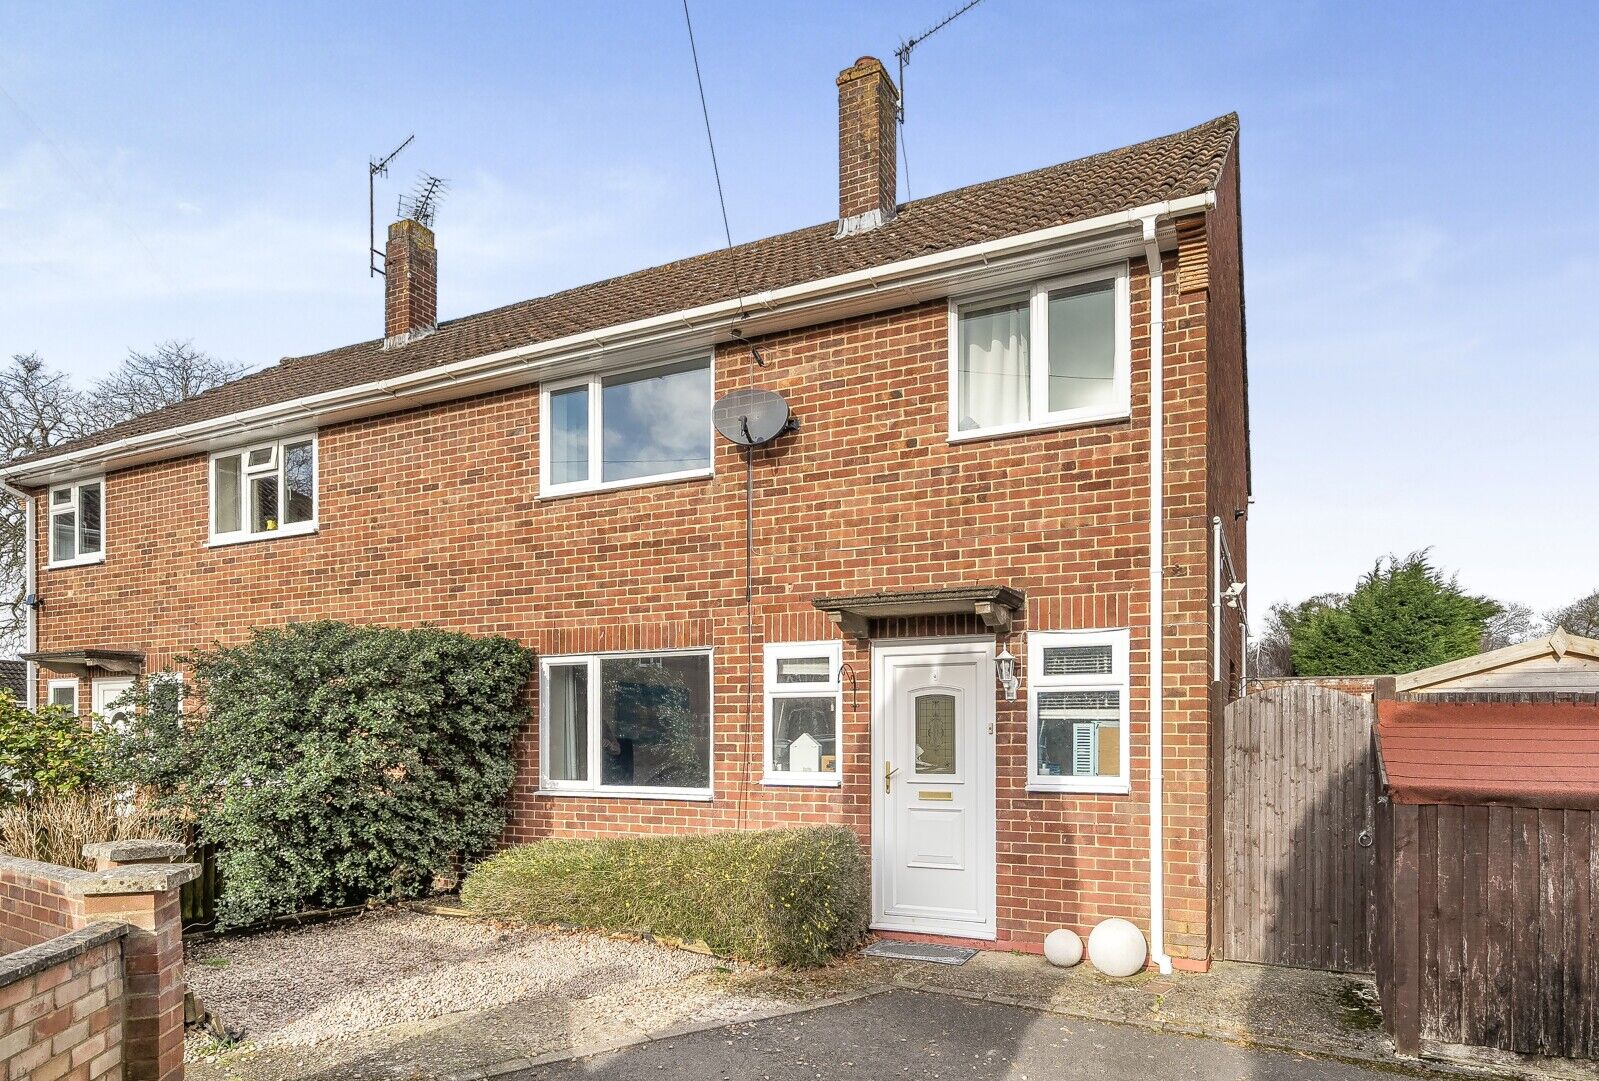 3 bedroom semi detached house for sale Gainsborough Crescent, Henley-on-Thames, RG9, main image